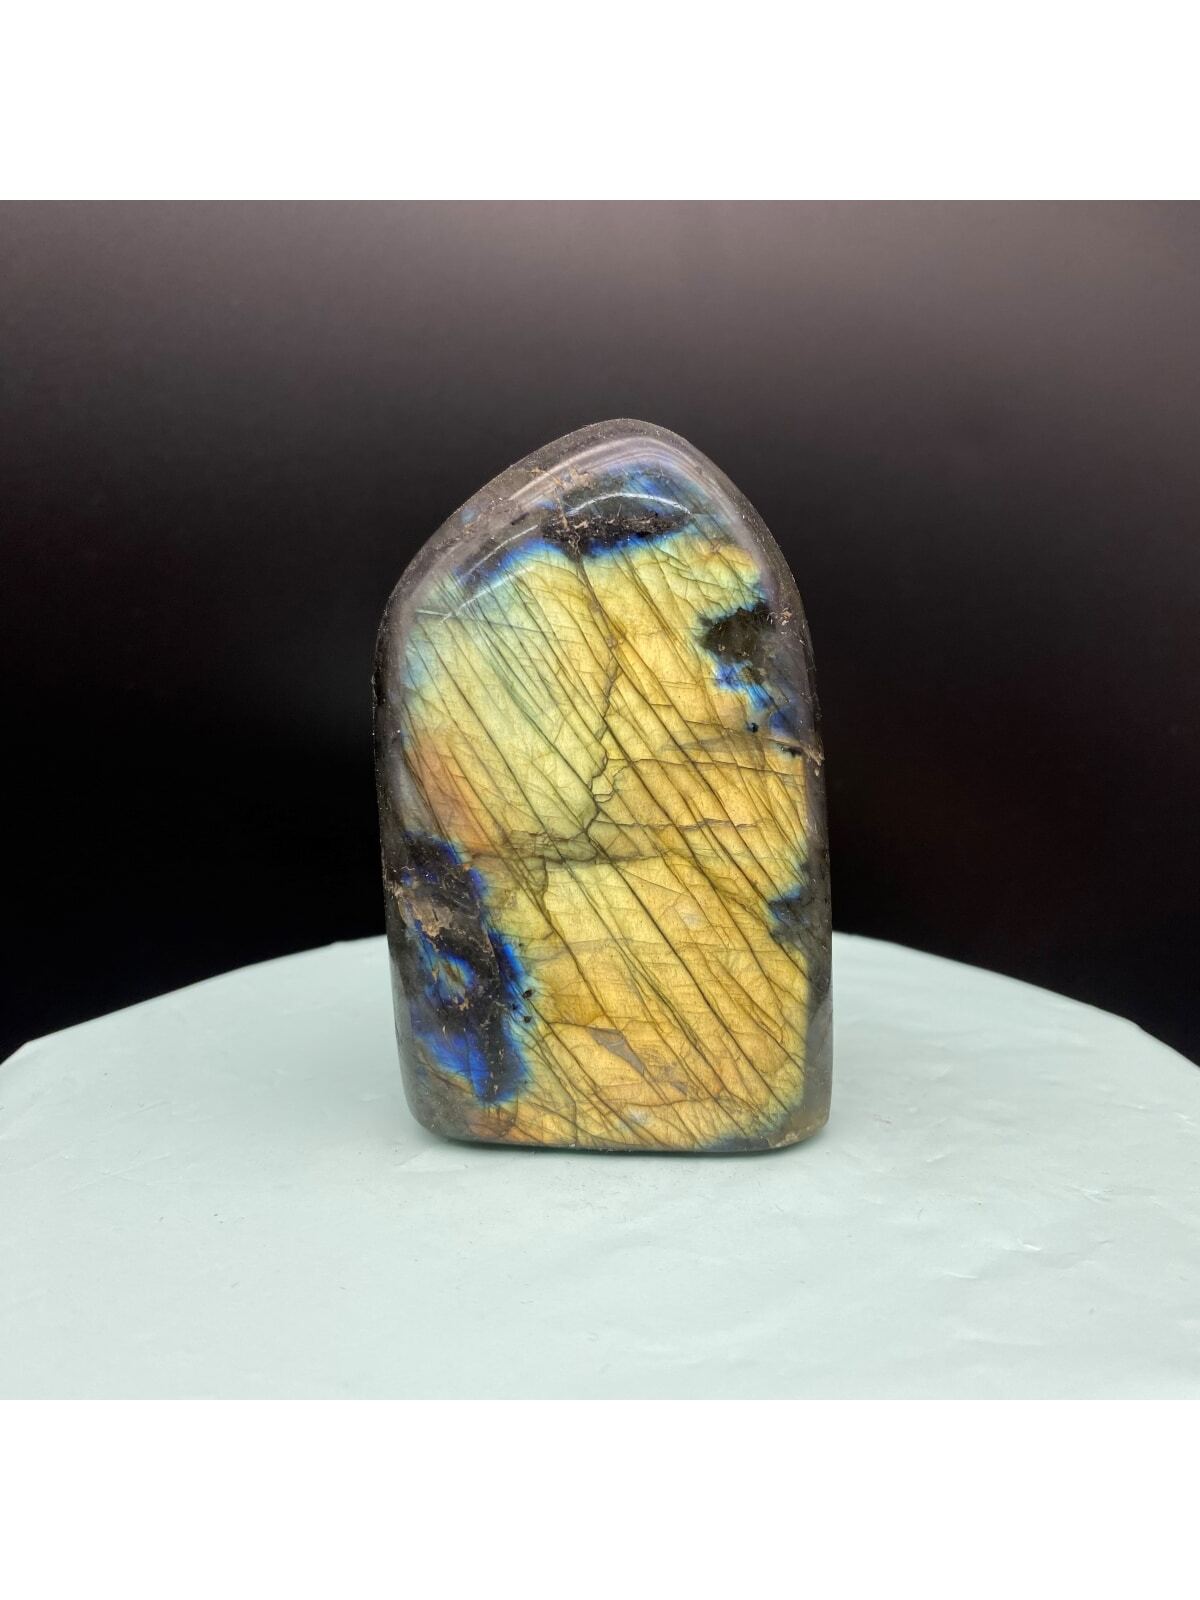 Rainbow Fluorite Specimen Display Piece, A Magical Spiritual Gift For Any Occasion 1pc